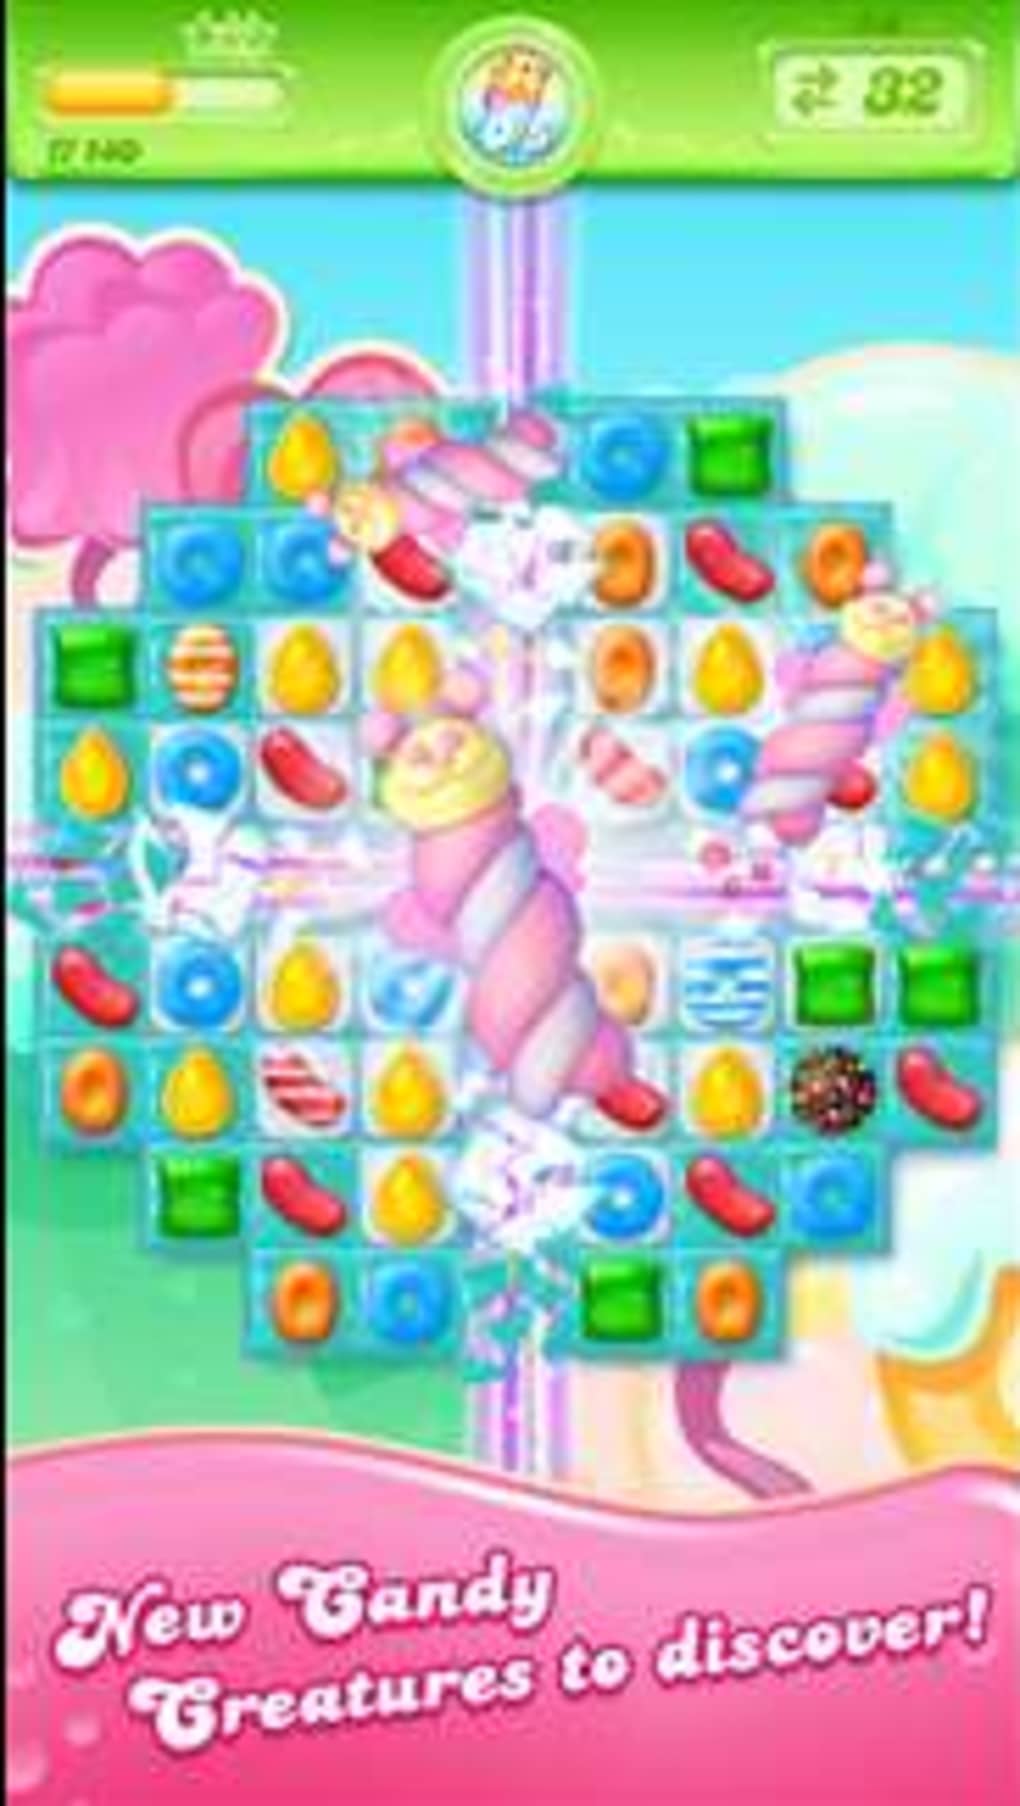 Candy Crush Jelly Saga APK + Mod 2.55.55 - Download Free for Android